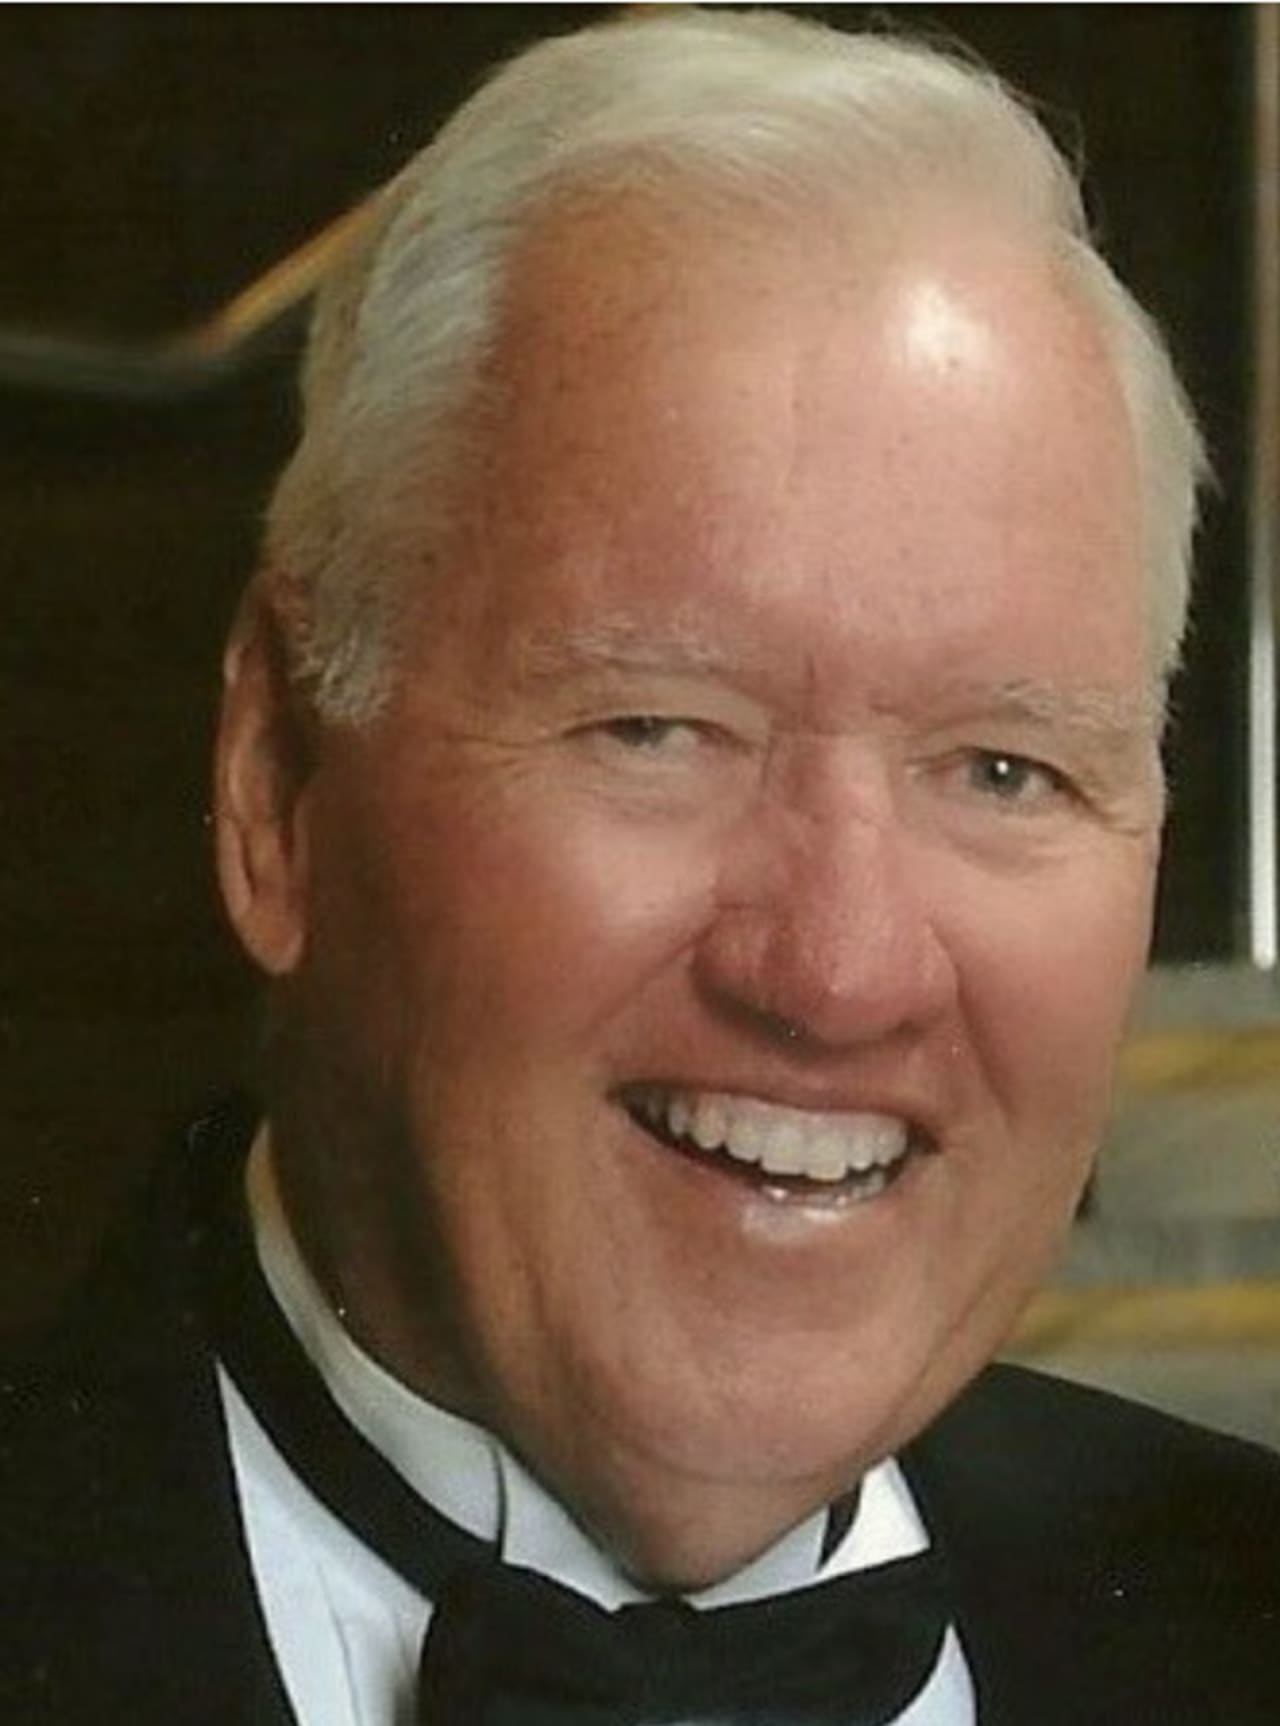 Joseph Troy of Somers died at the age of 83.